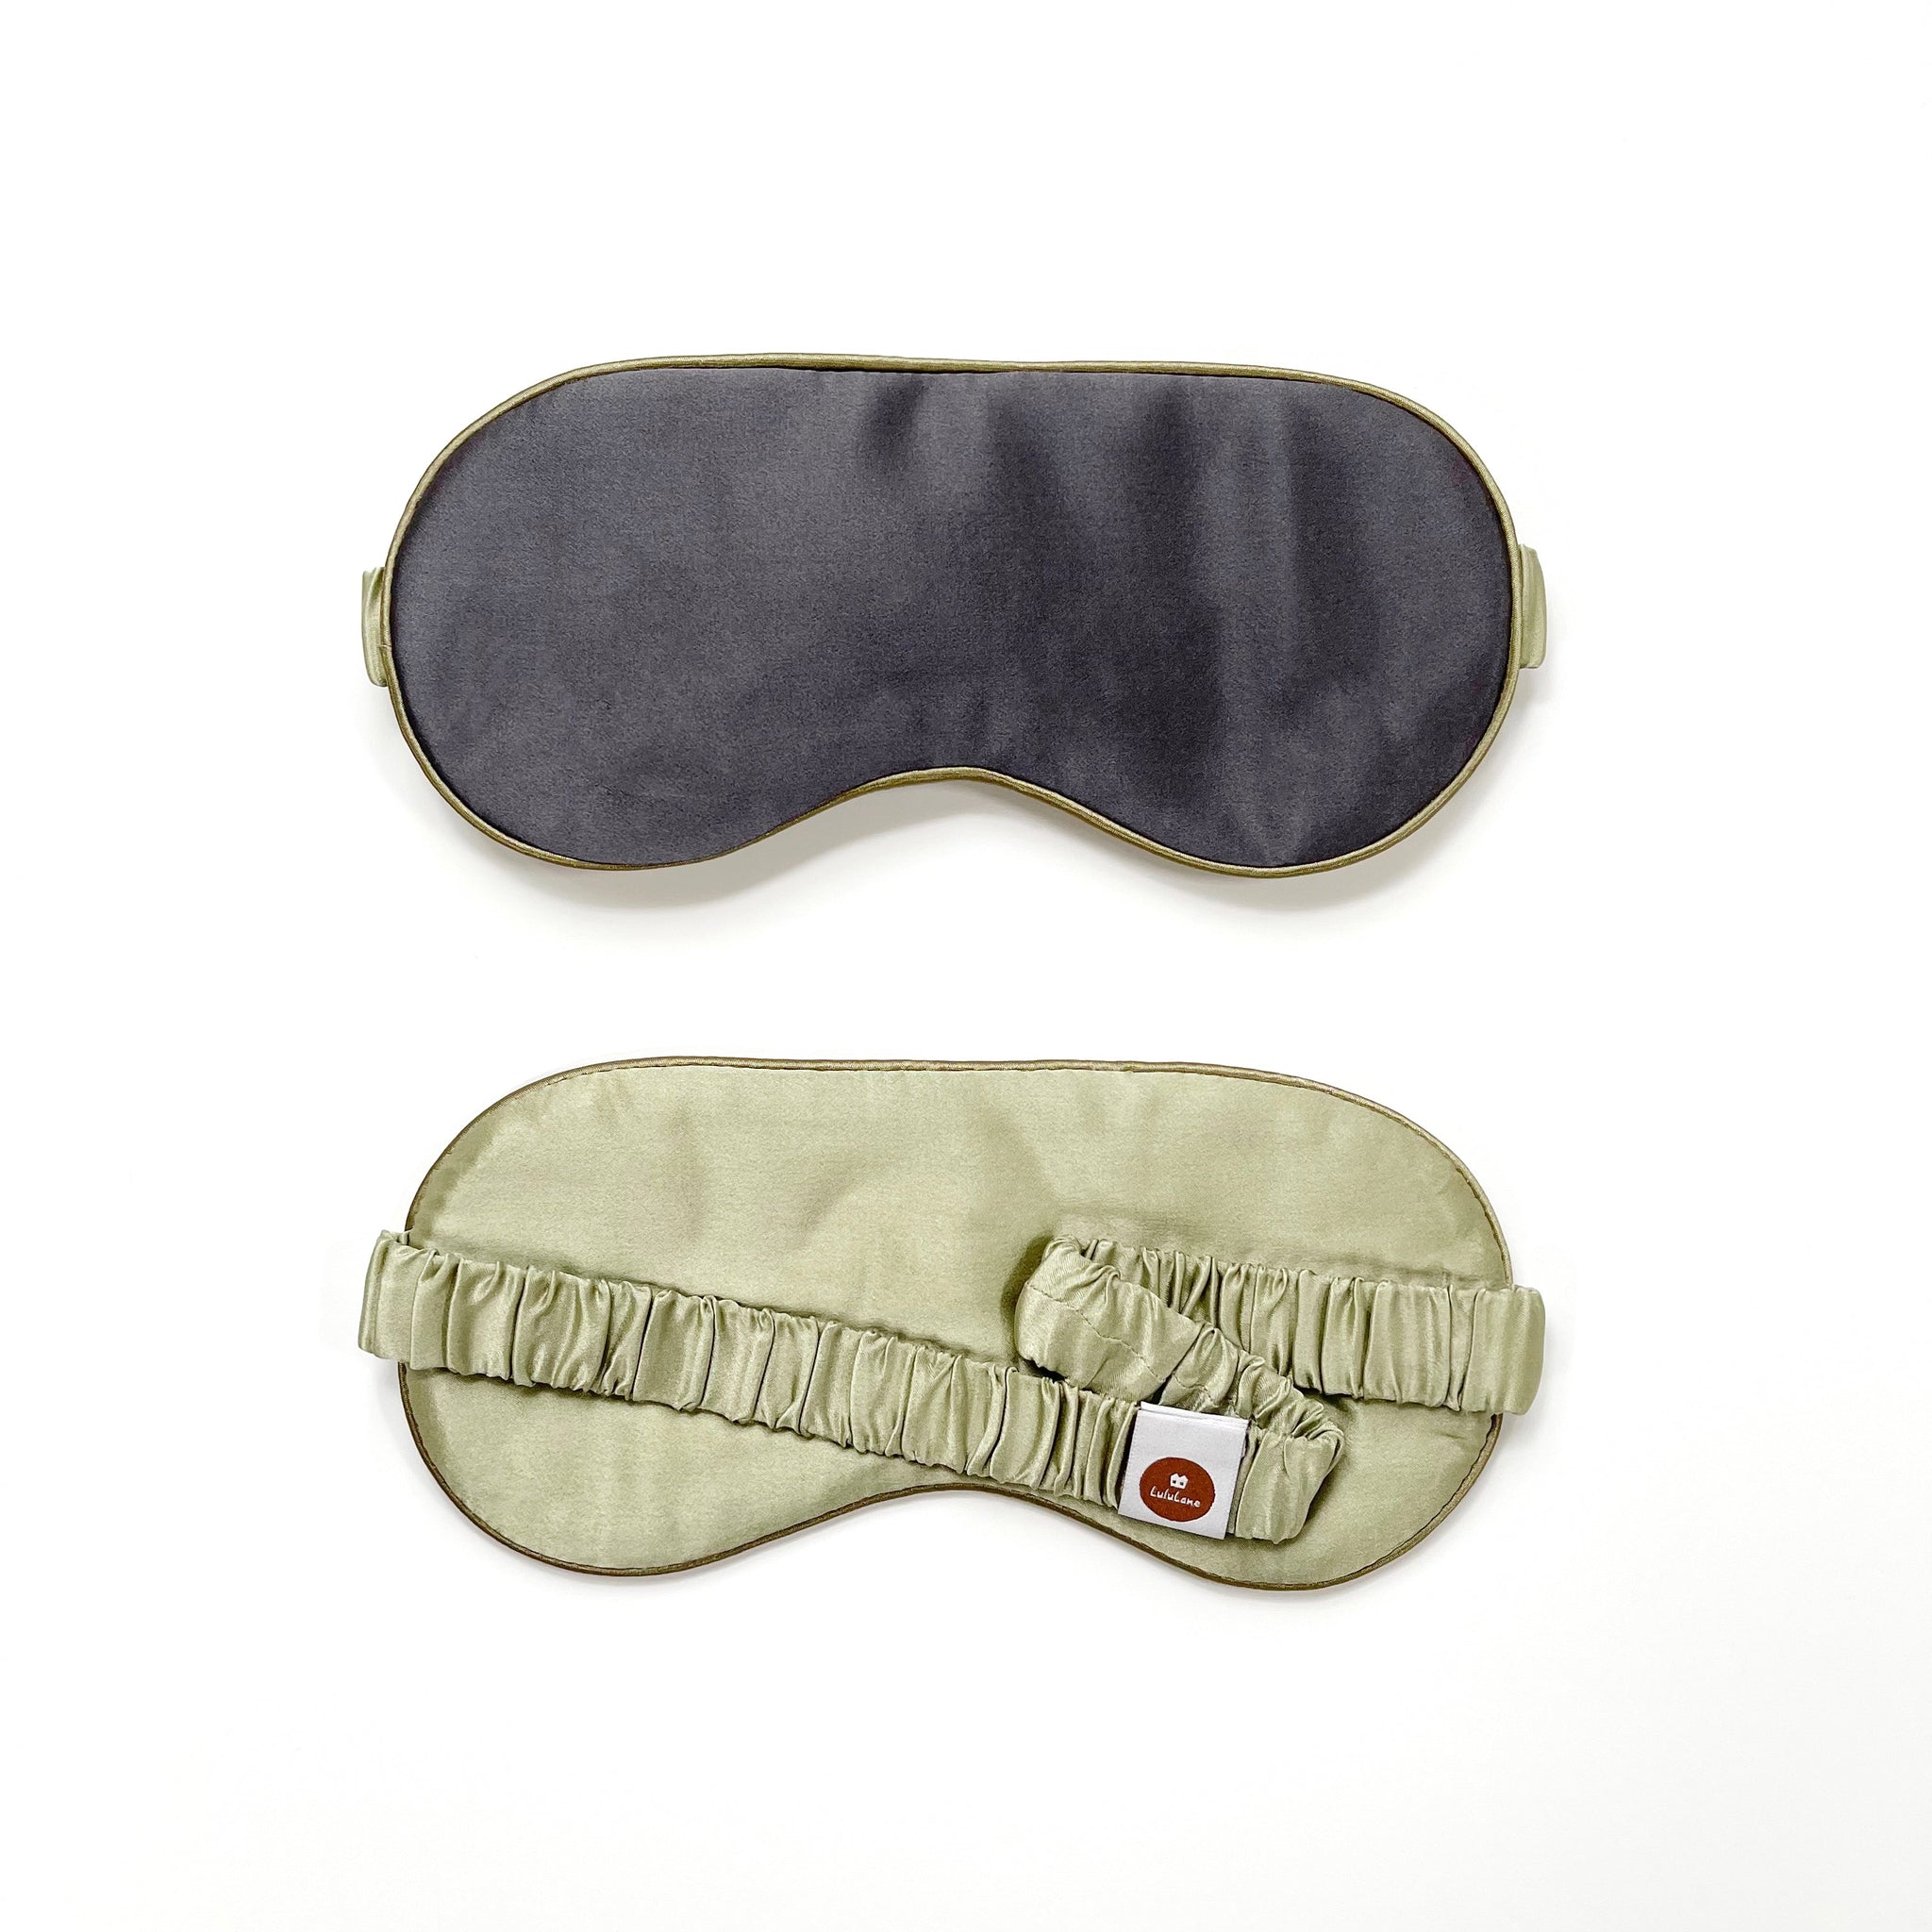 a professionally designed and handcrafted dark grey silk eye mask featuring a pea green back side, a pea green drawstring and a pea green elastic strap